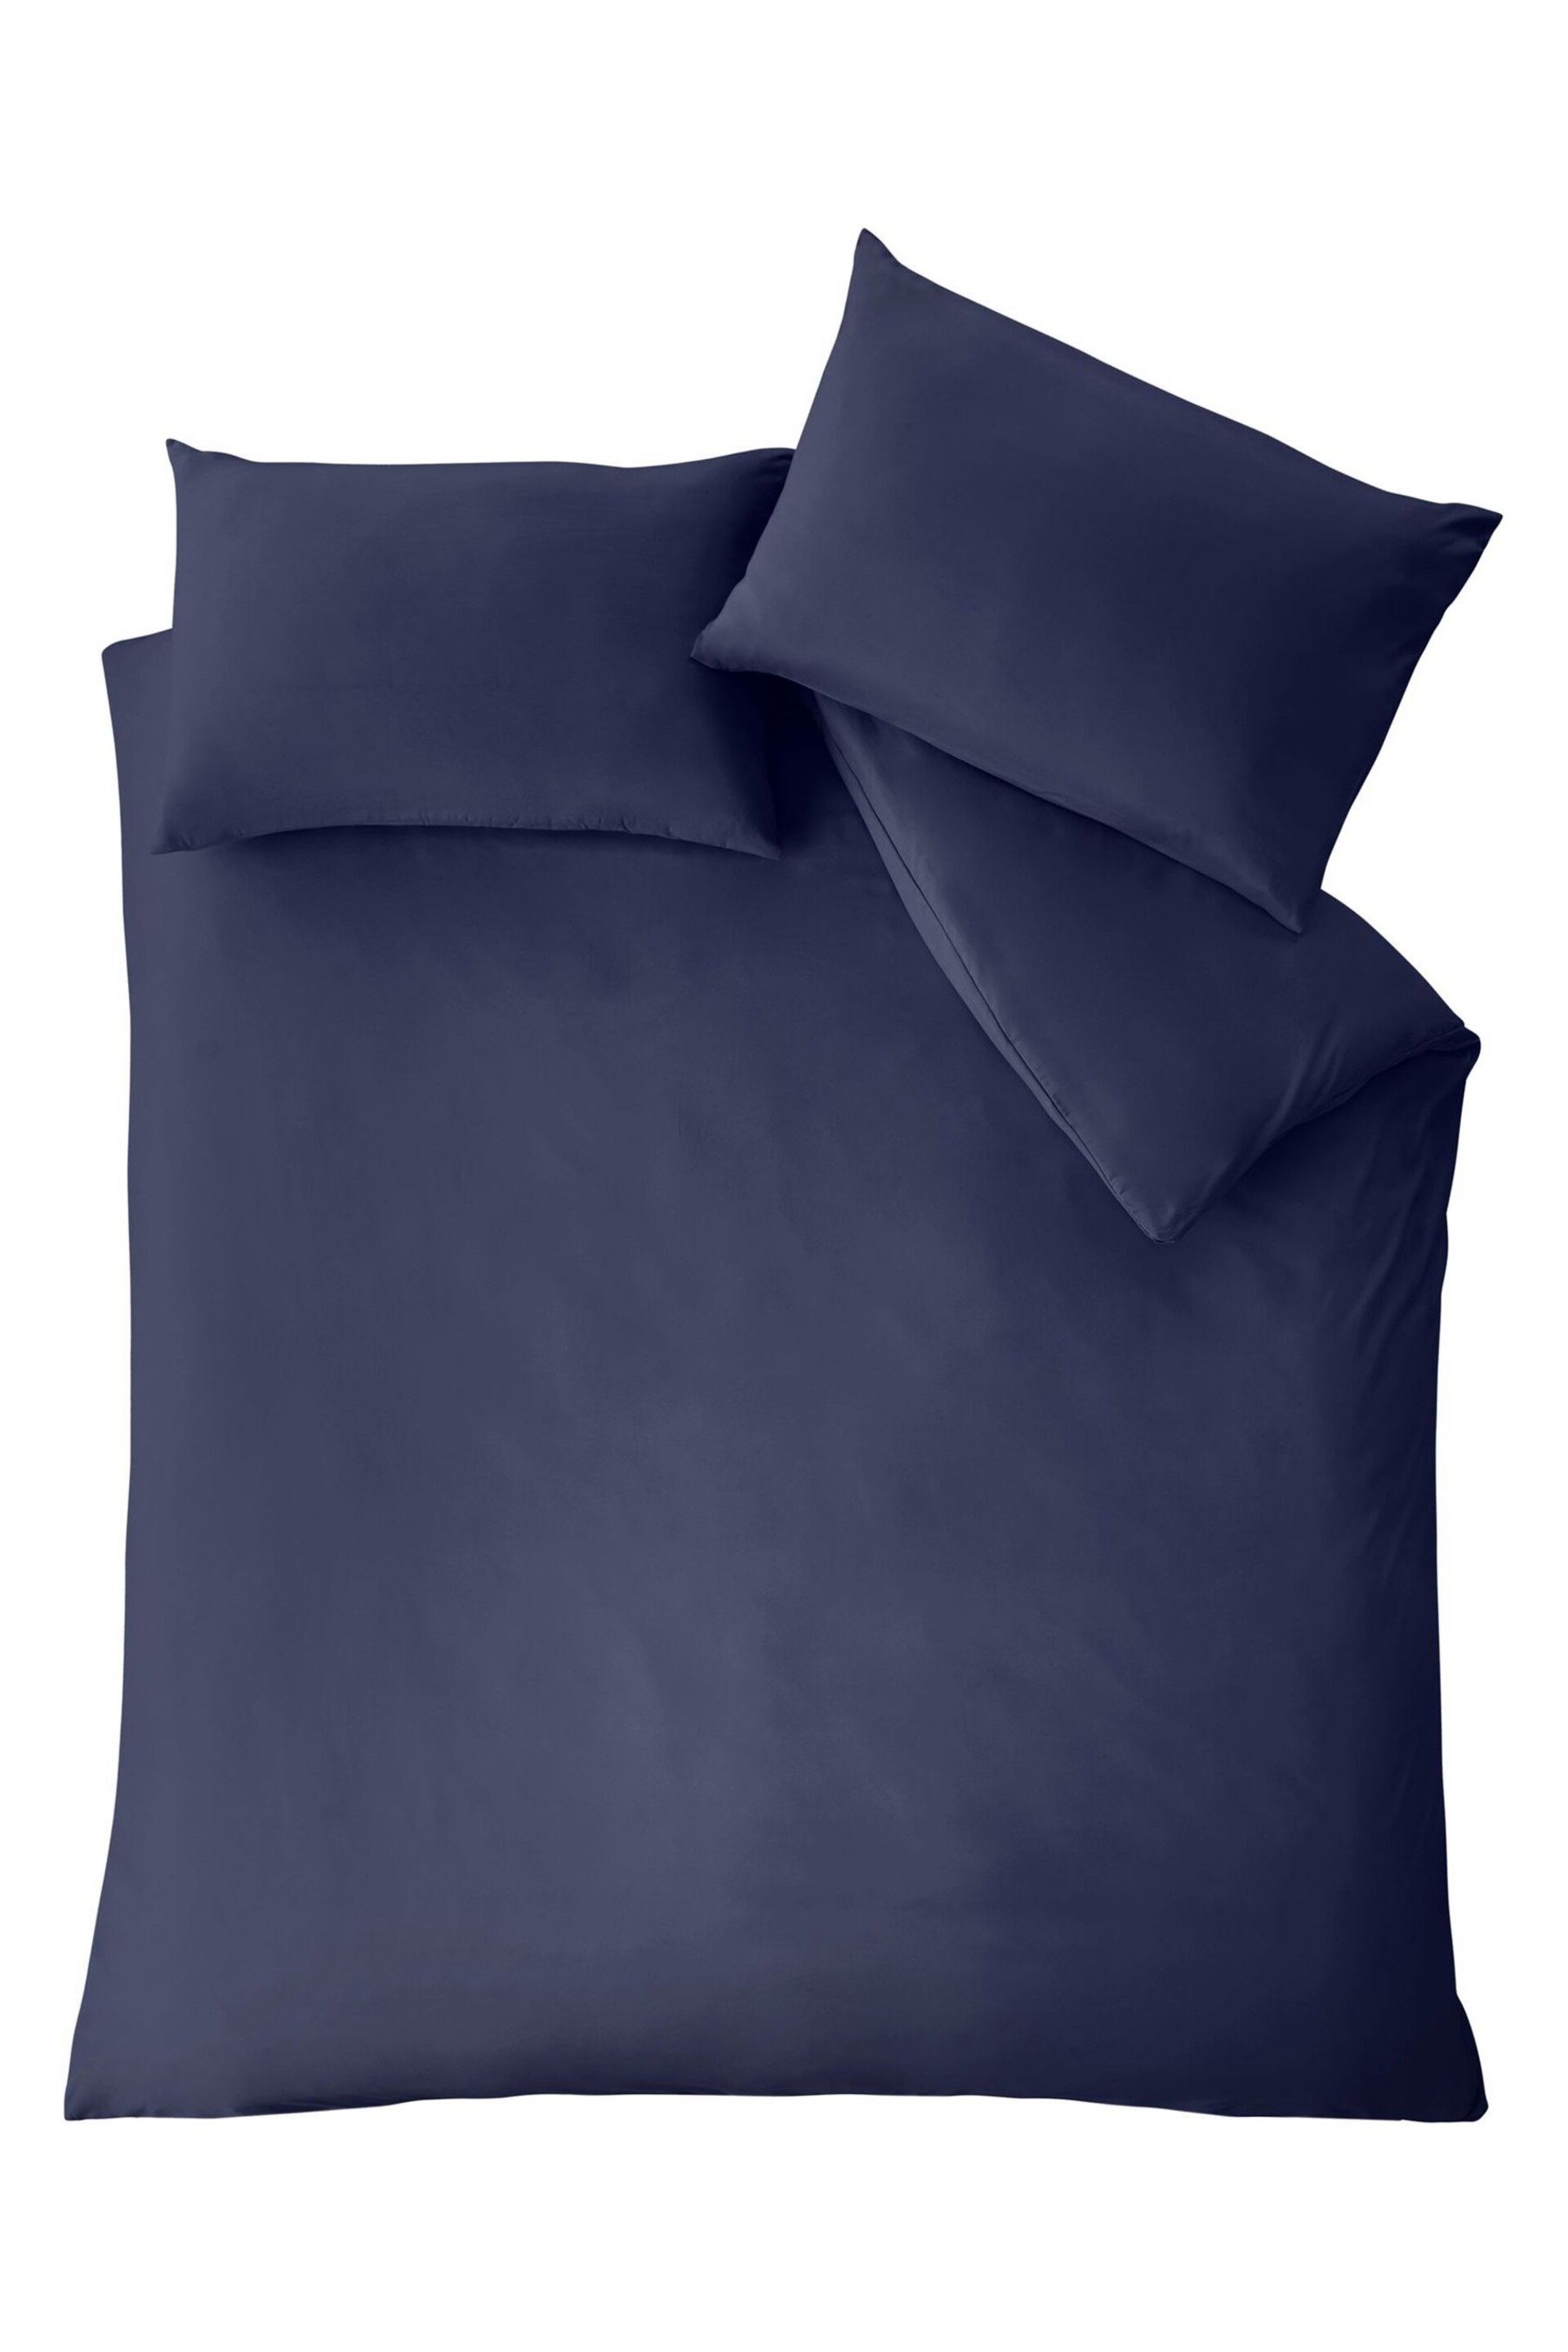 Catherine Lansfield Navy Blue So Soft Easy Iron Duvet Cover Set - Image 3 of 3